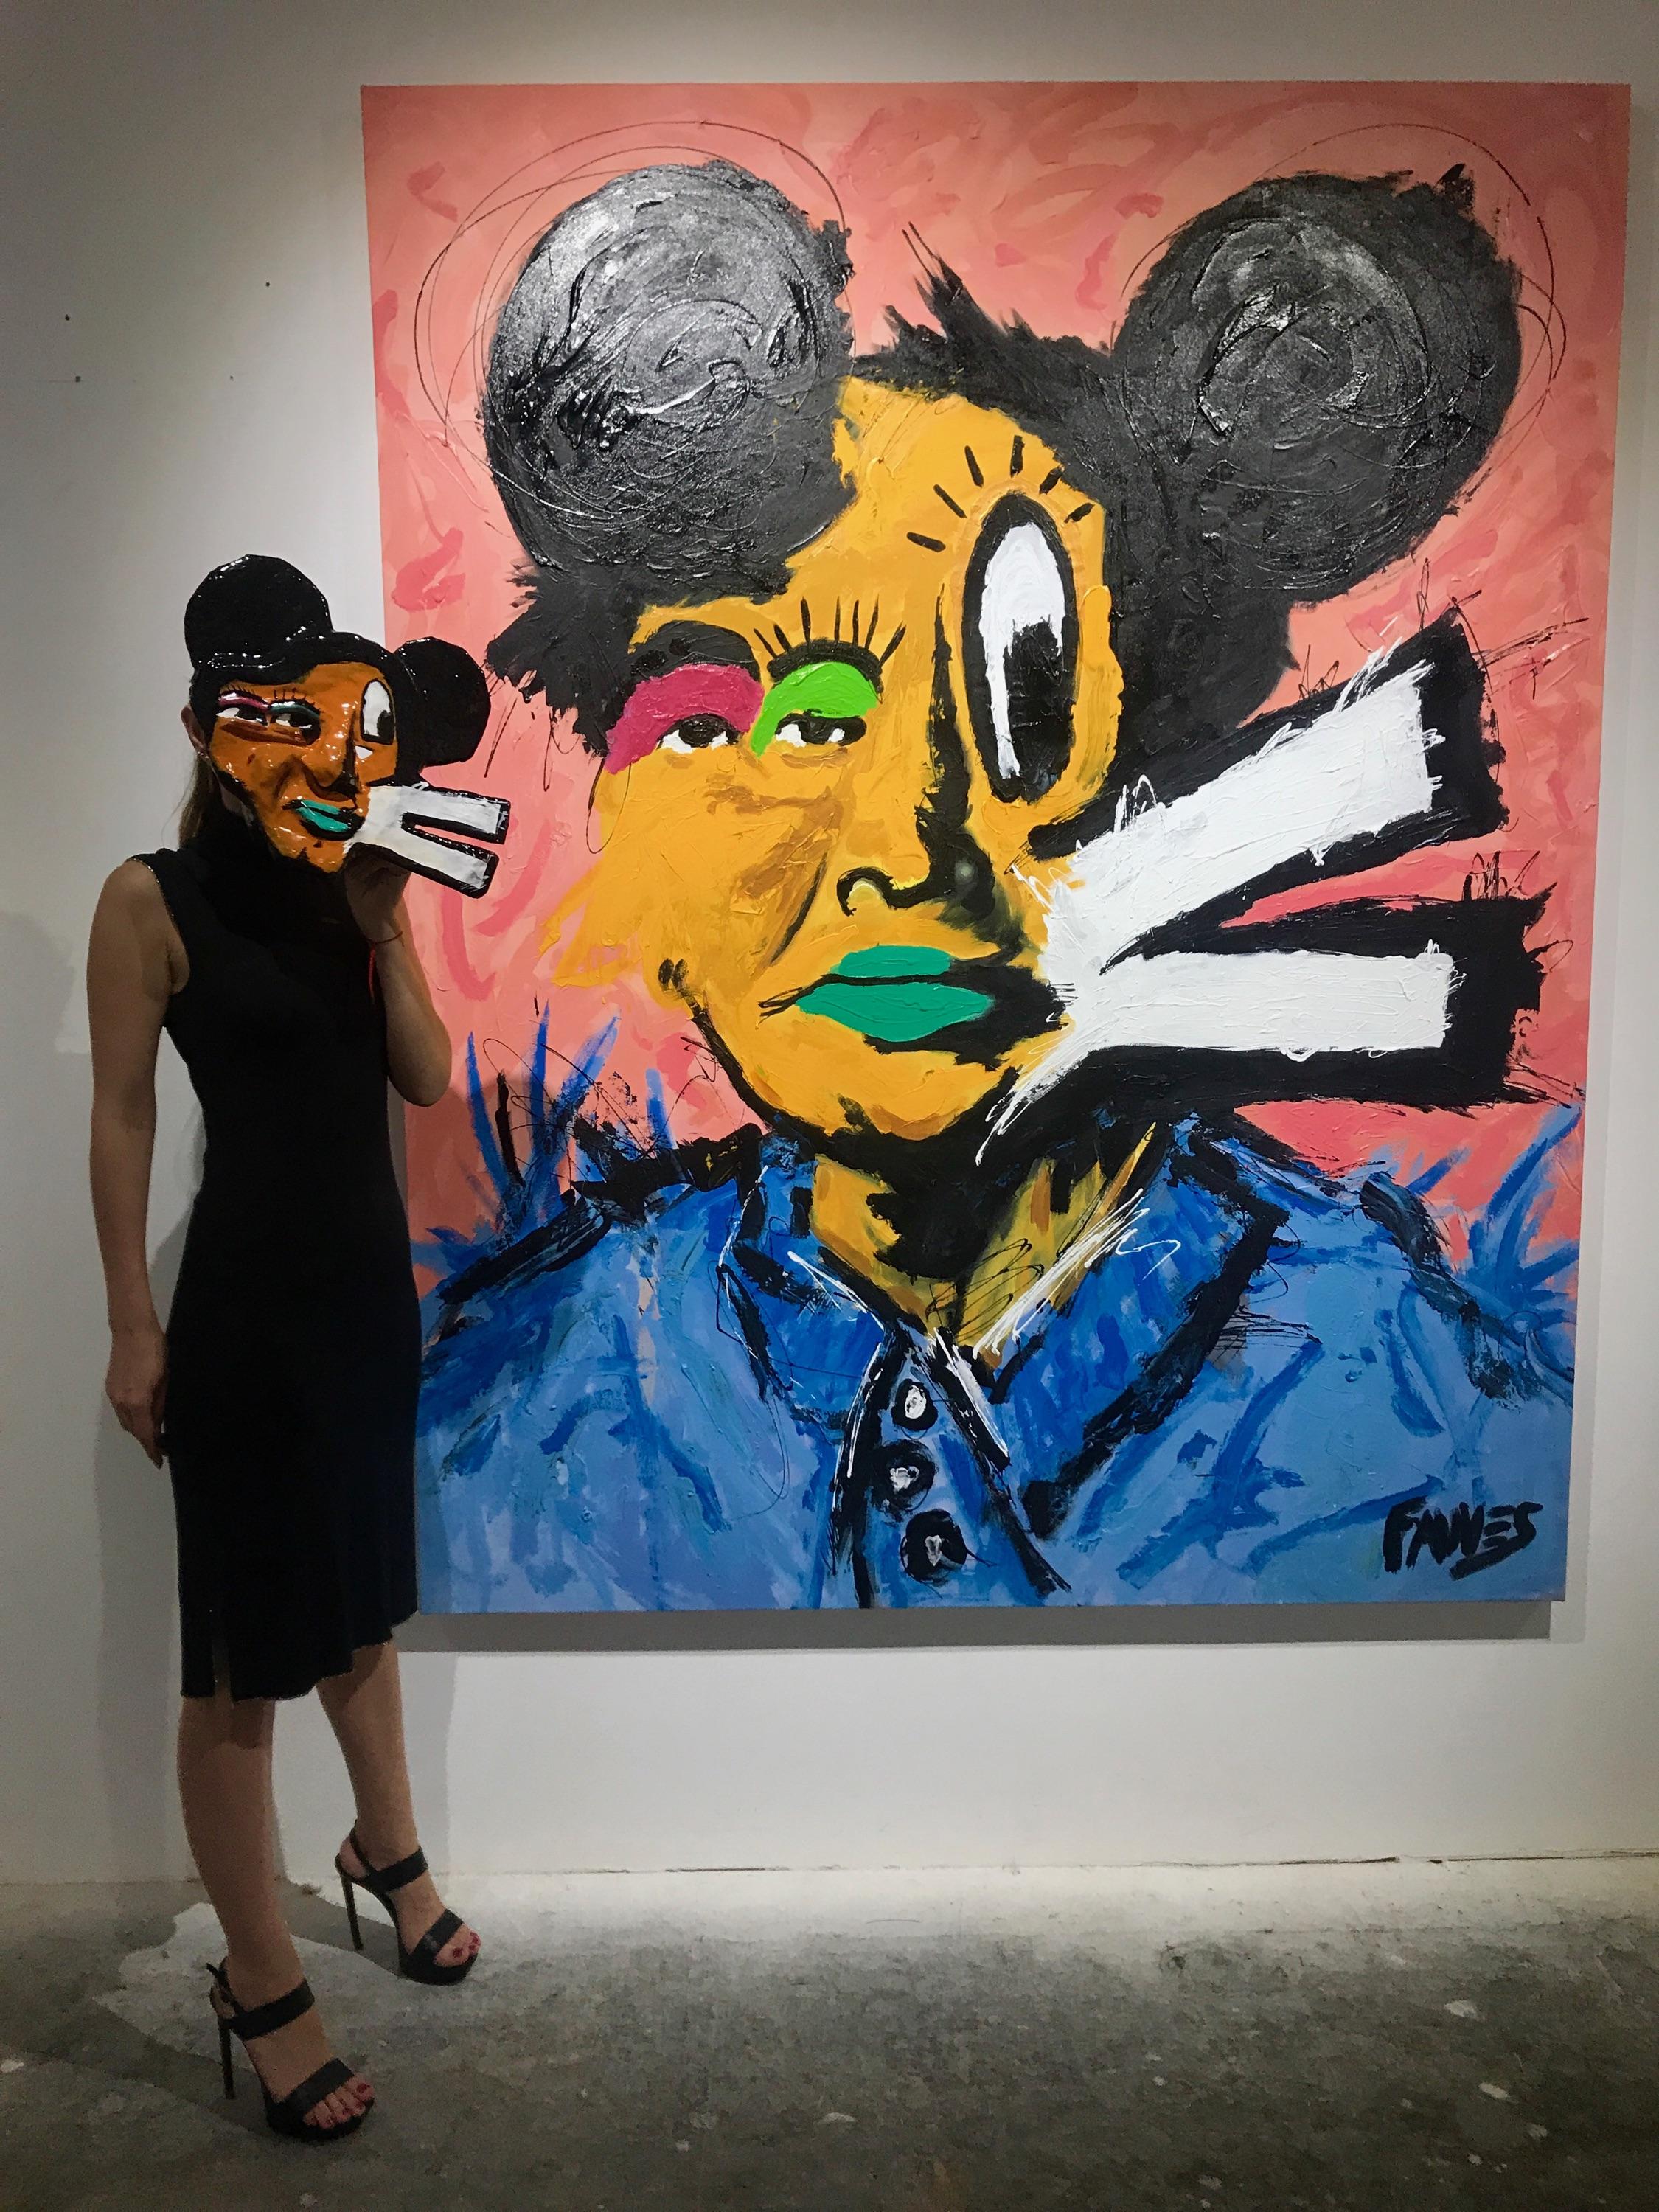 One of a kind collectible mask by John Paul Fauves 
Acrylic over paper mache

John Paul Fauves (born in 1980) is a contemporary Artist from Costa Rica . His artistic journey started at a very young age after he became a student of Joaquin Rodriguez